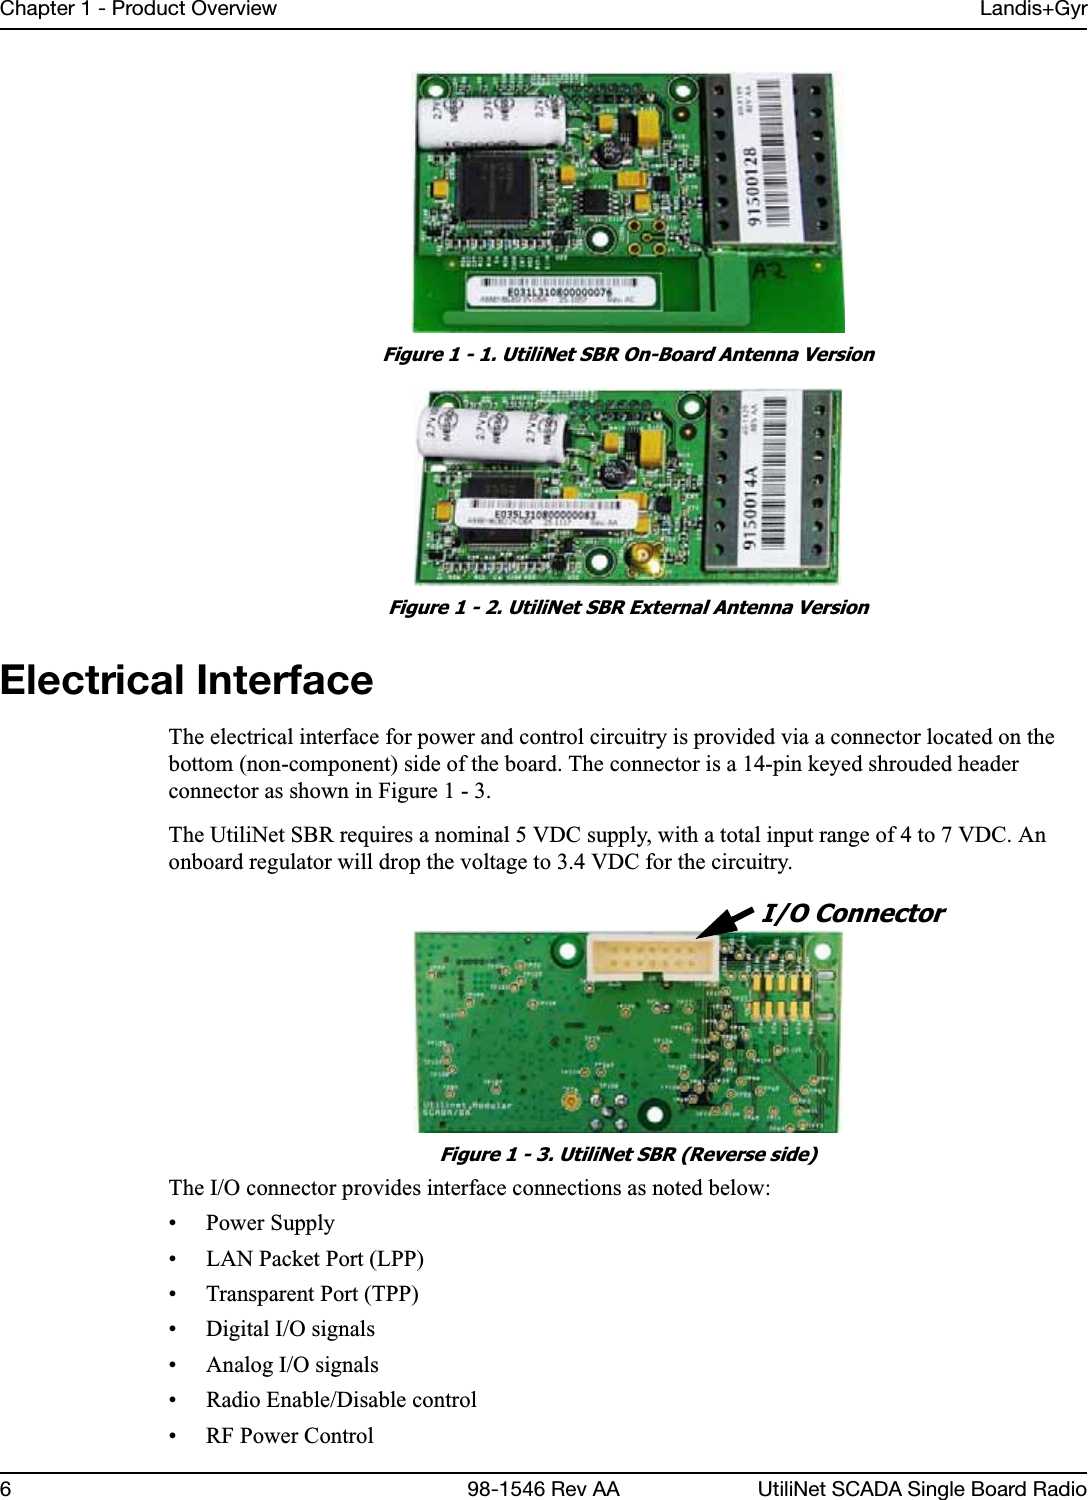 Chapter 1 - Product Overview Landis+Gyr6 98-1546 Rev AA UtiliNet SCADA Single Board RadioFigure 1 - 1. UtiliNet SBR On-Board Antenna VersionFigure 1 - 2. UtiliNet SBR External Antenna VersionElectrical InterfaceThe electrical interface for power and control circuitry is provided via a connector located on the bottom (non-component) side of the board. The connector is a 14-pin keyed shrouded header connector as shown in Figure 1 - 3.The UtiliNet SBR requires a nominal 5 VDC supply, with a total input range of 4 to 7 VDC. An onboard regulator will drop the voltage to 3.4 VDC for the circuitry.Figure 1 - 3. UtiliNet SBR (Reverse side)The I/O connector provides interface connections as noted below:• Power Supply • LAN Packet Port (LPP)• Transparent Port (TPP)• Digital I/O signals• Analog I/O signals• Radio Enable/Disable control• RF Power ControlI/O Connector